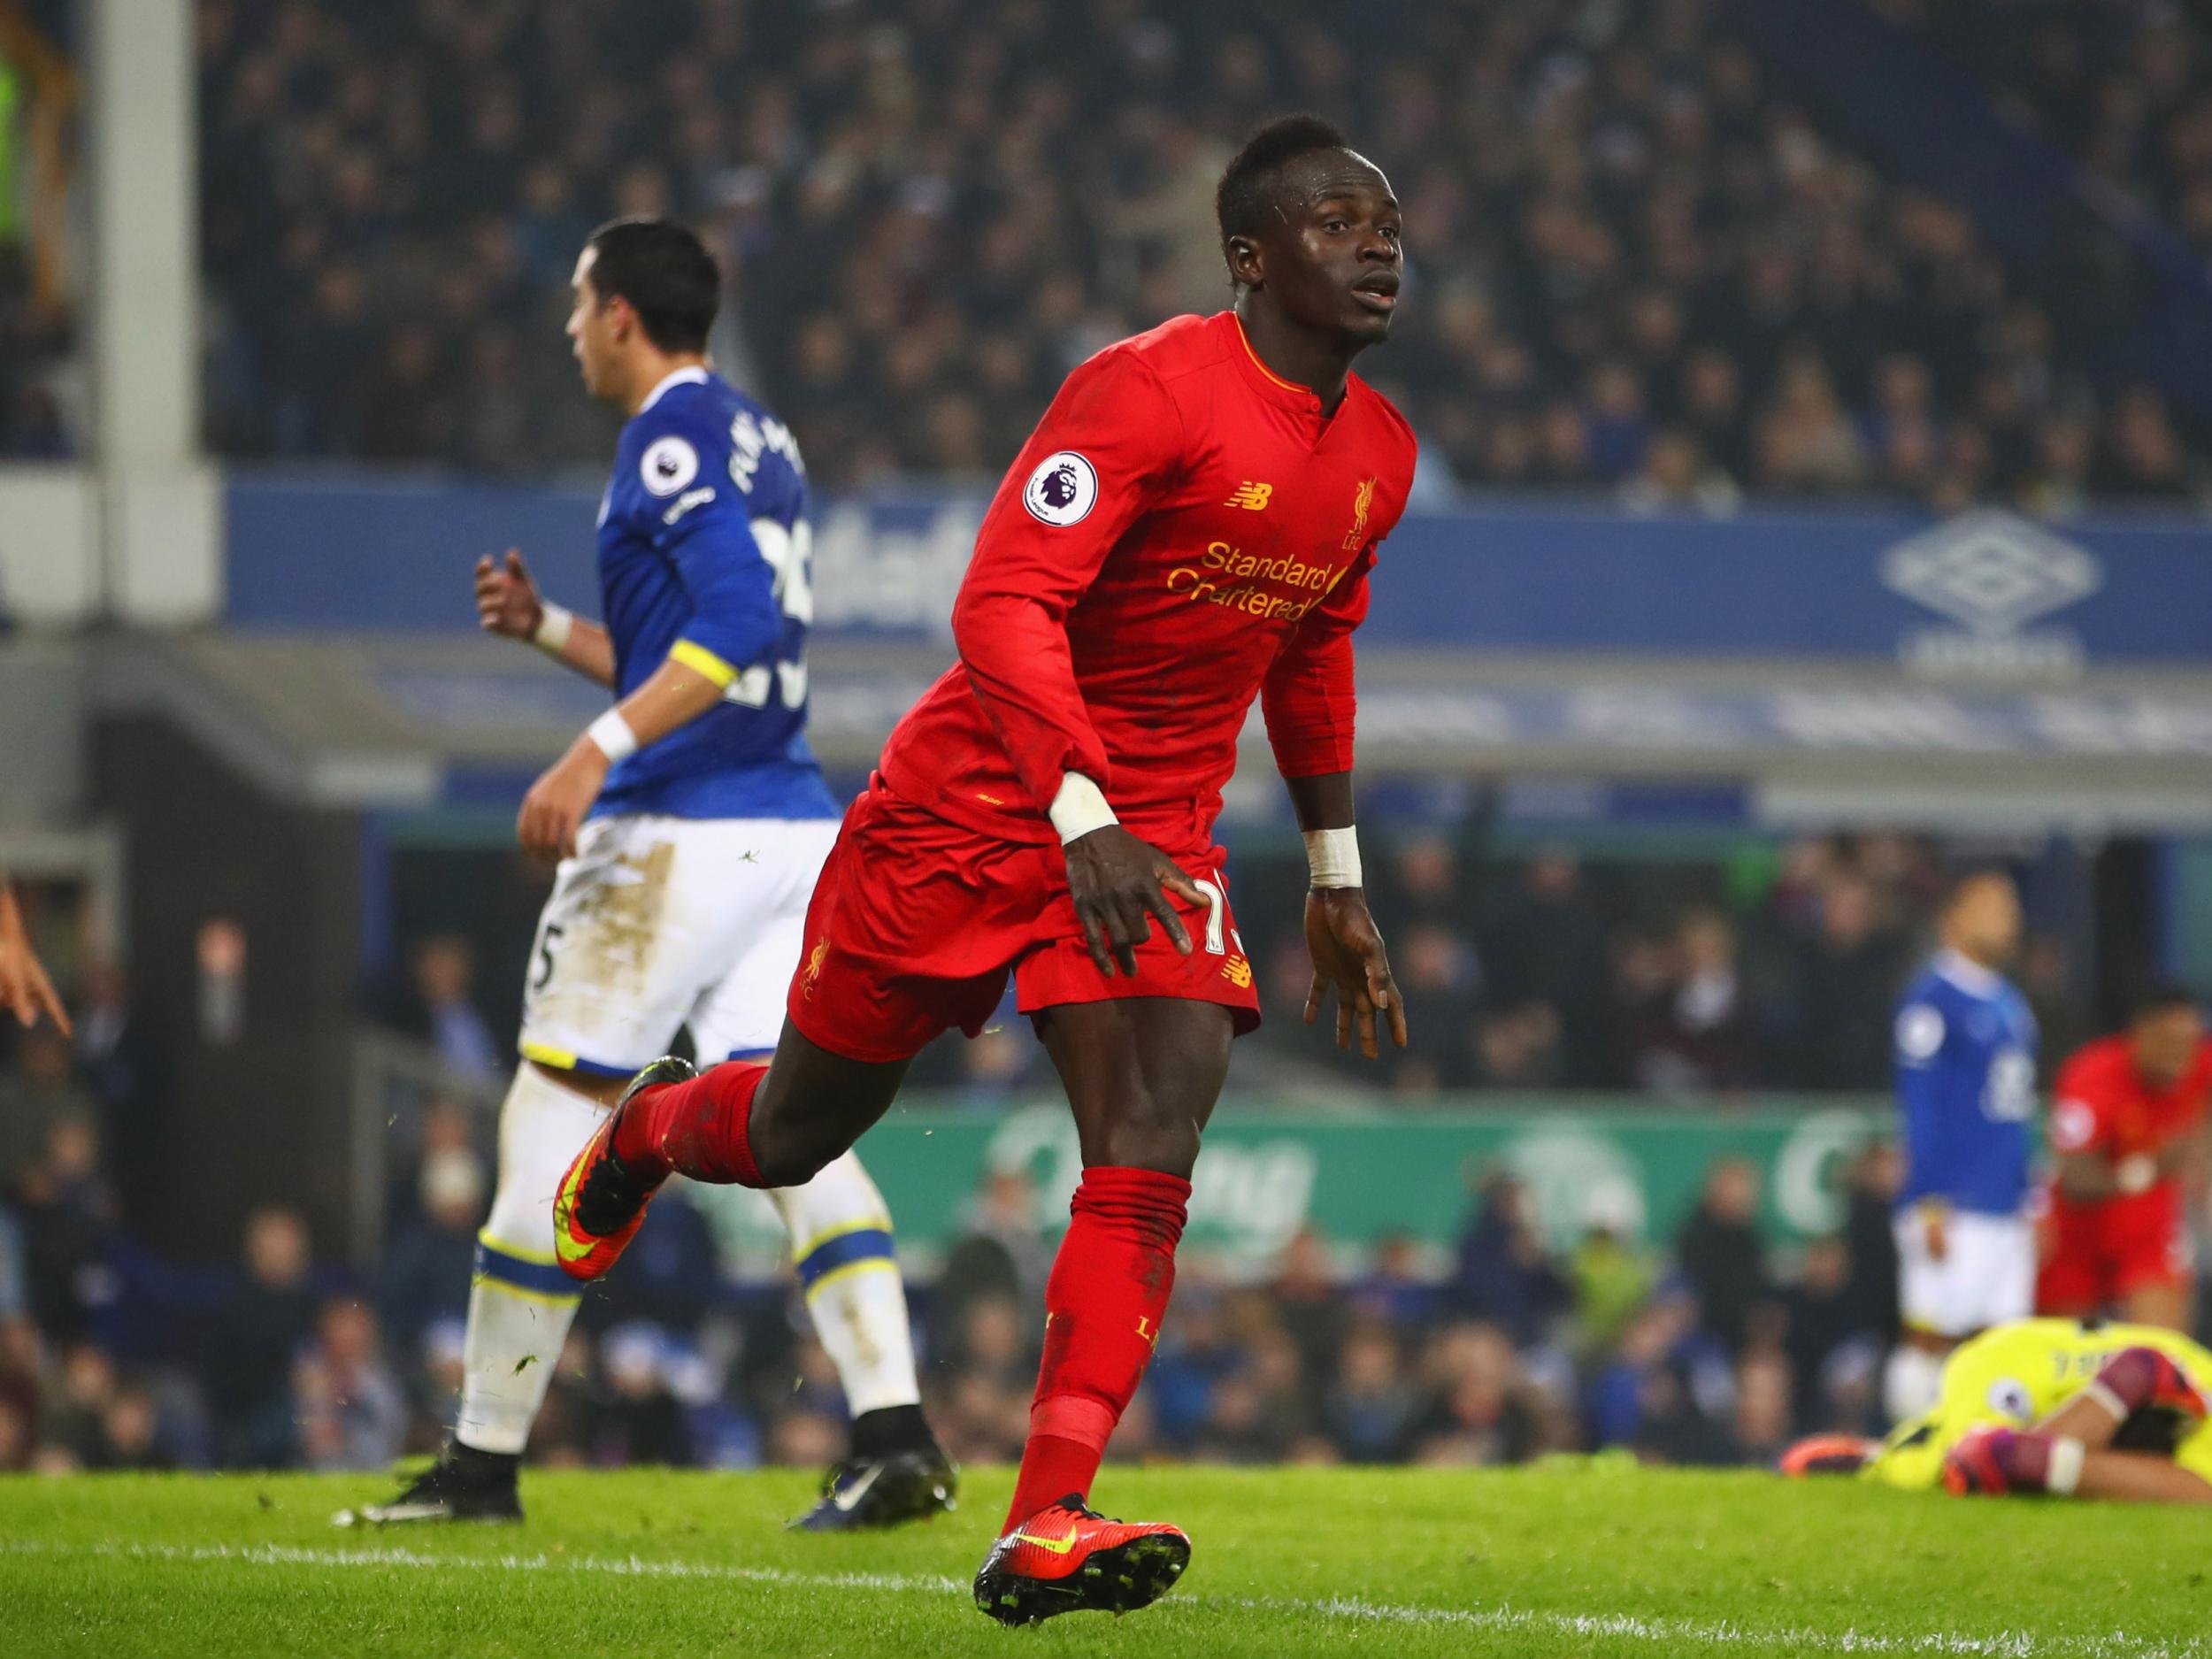 Mane has eight goals for Liverpool this season